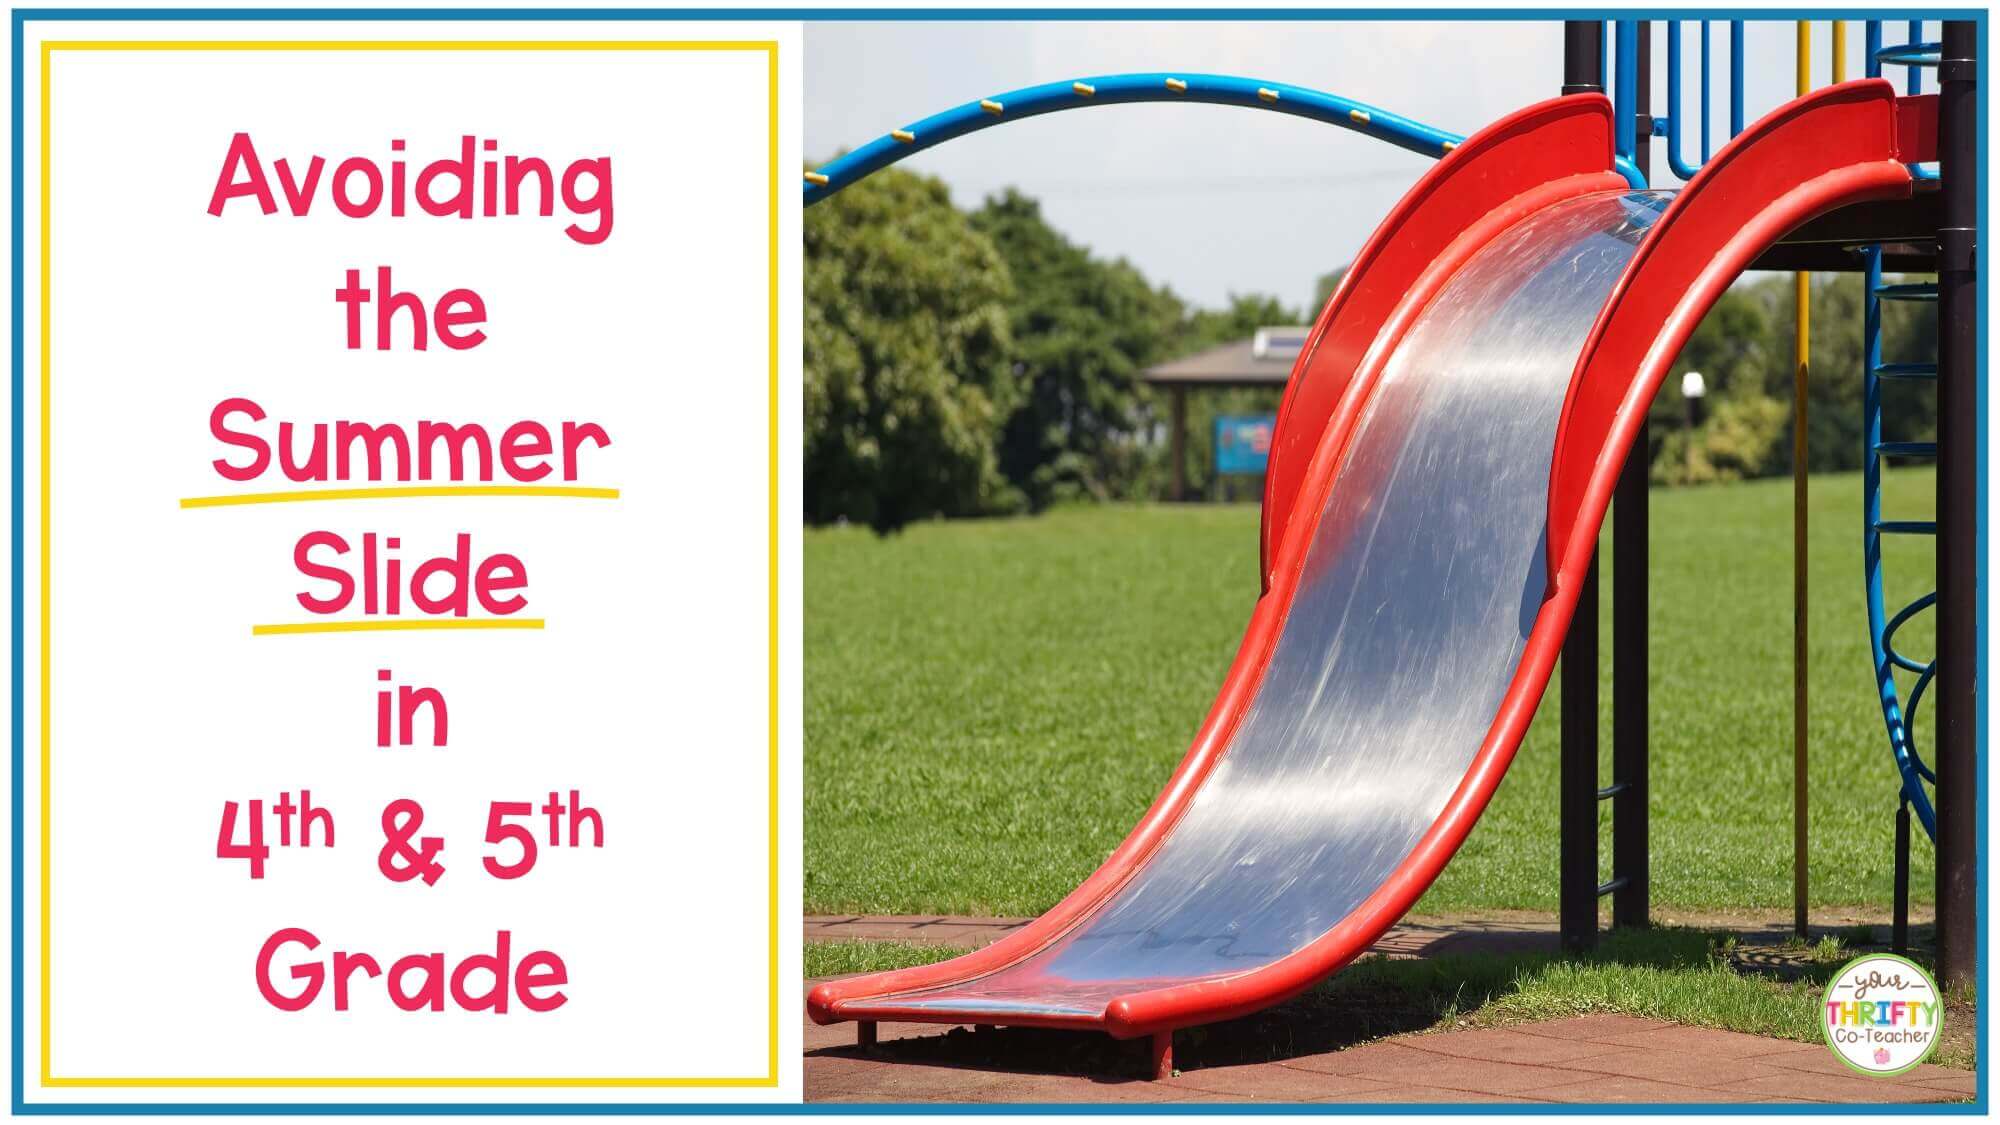 Summer Slide Puzzle  Play Summer Slide Puzzle on PrimaryGames